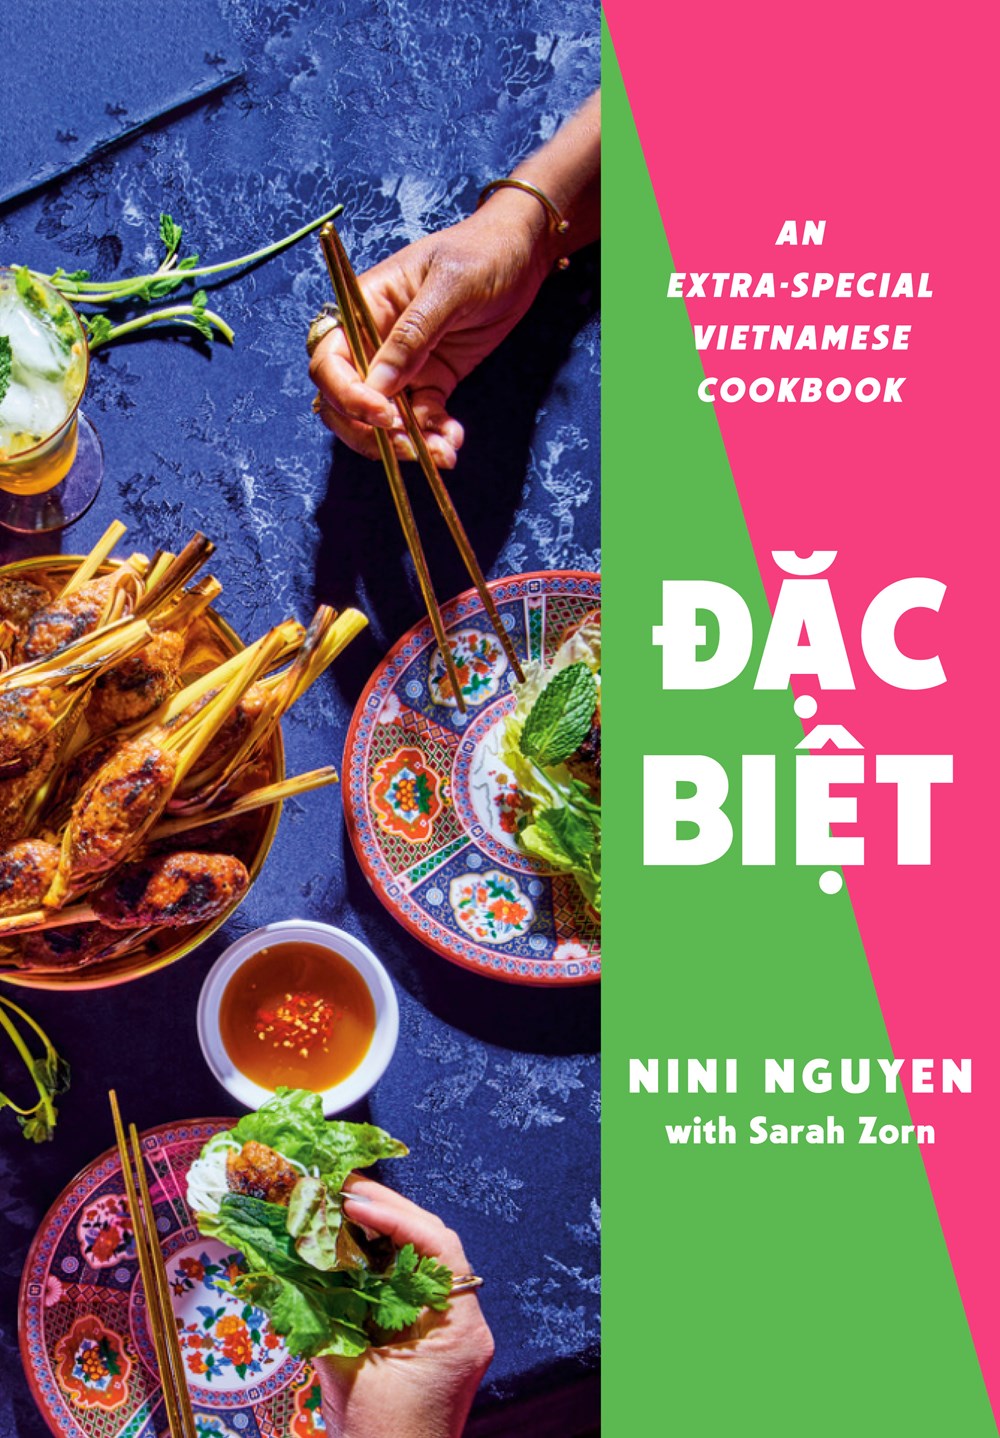 Dac Biet: An Extra Special Vietnamese Cookbook by Nini Nguyen with Sarah Zorn (6/18/24)